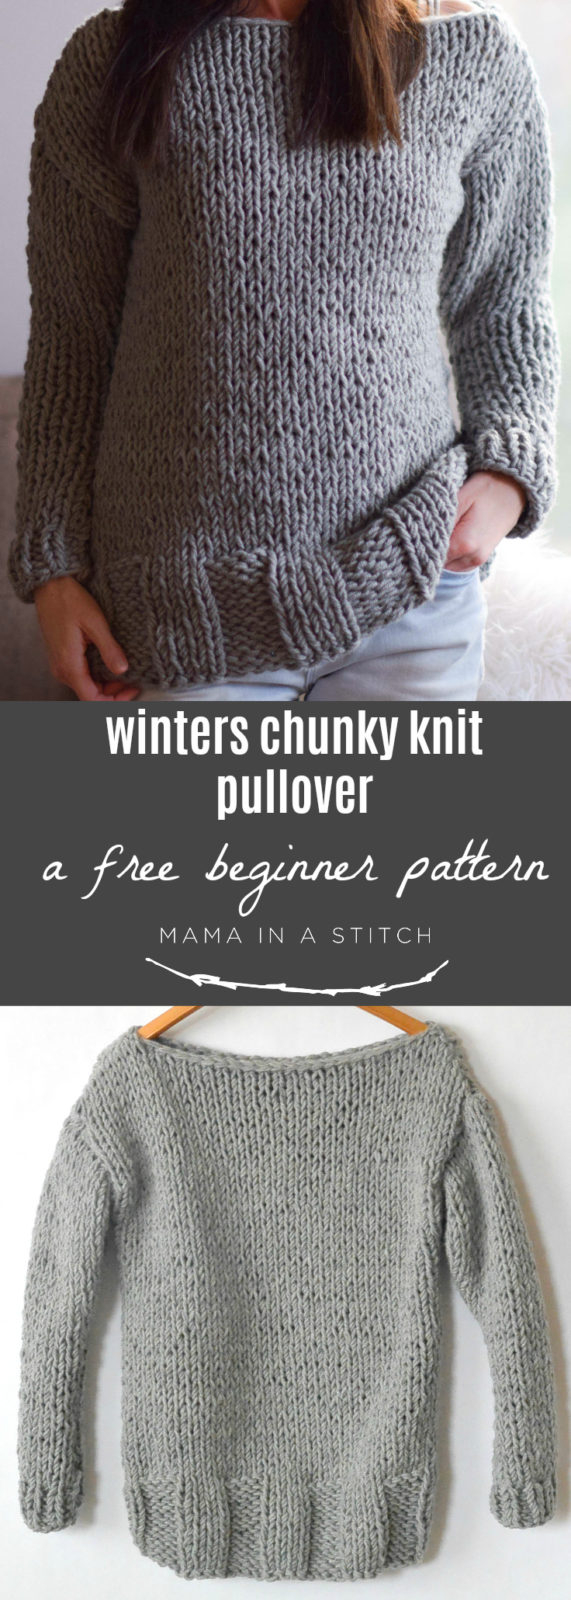 Free Sweater Patterns To Knit Winters Chunky Easy Knit Pullover Pattern Mama In A Stitch